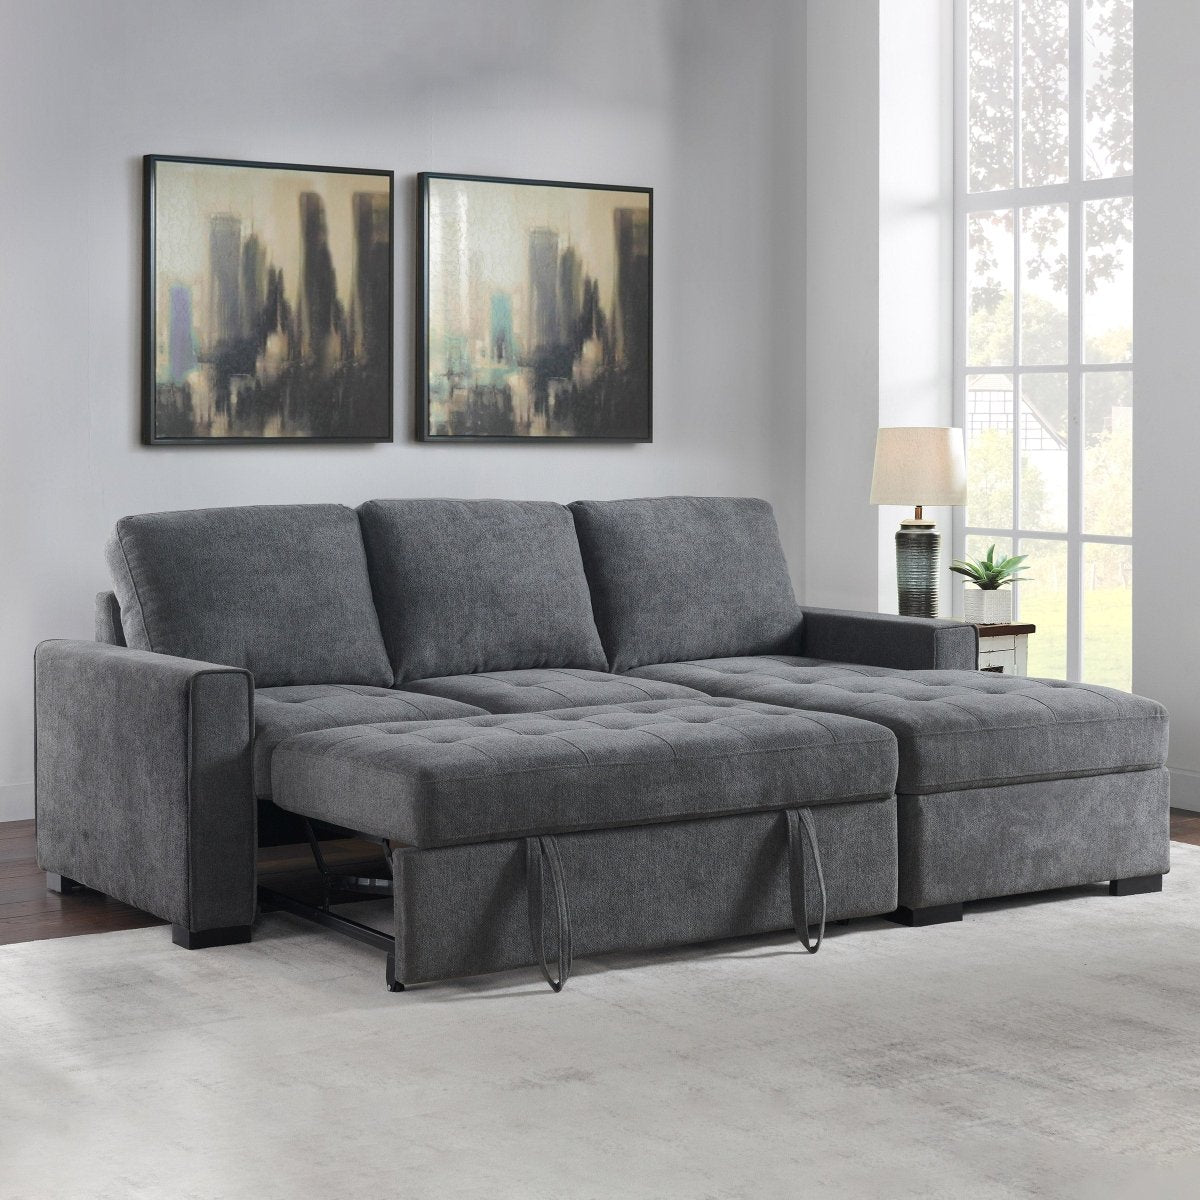 Kendale Sleeper Sofa with Storage Chaise - Alpine Outlets